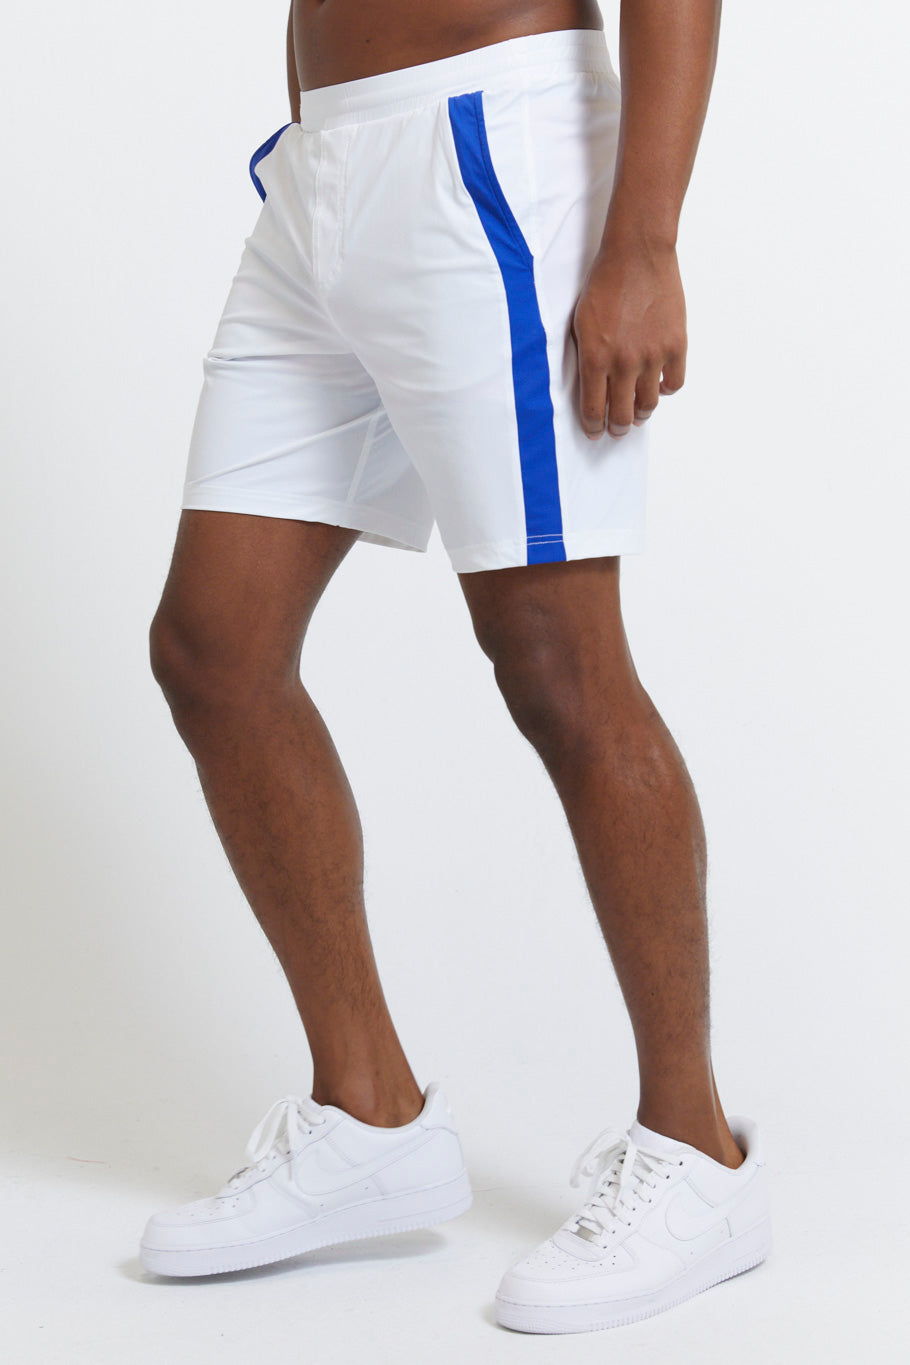 Image of the parnell tennis short in bright white